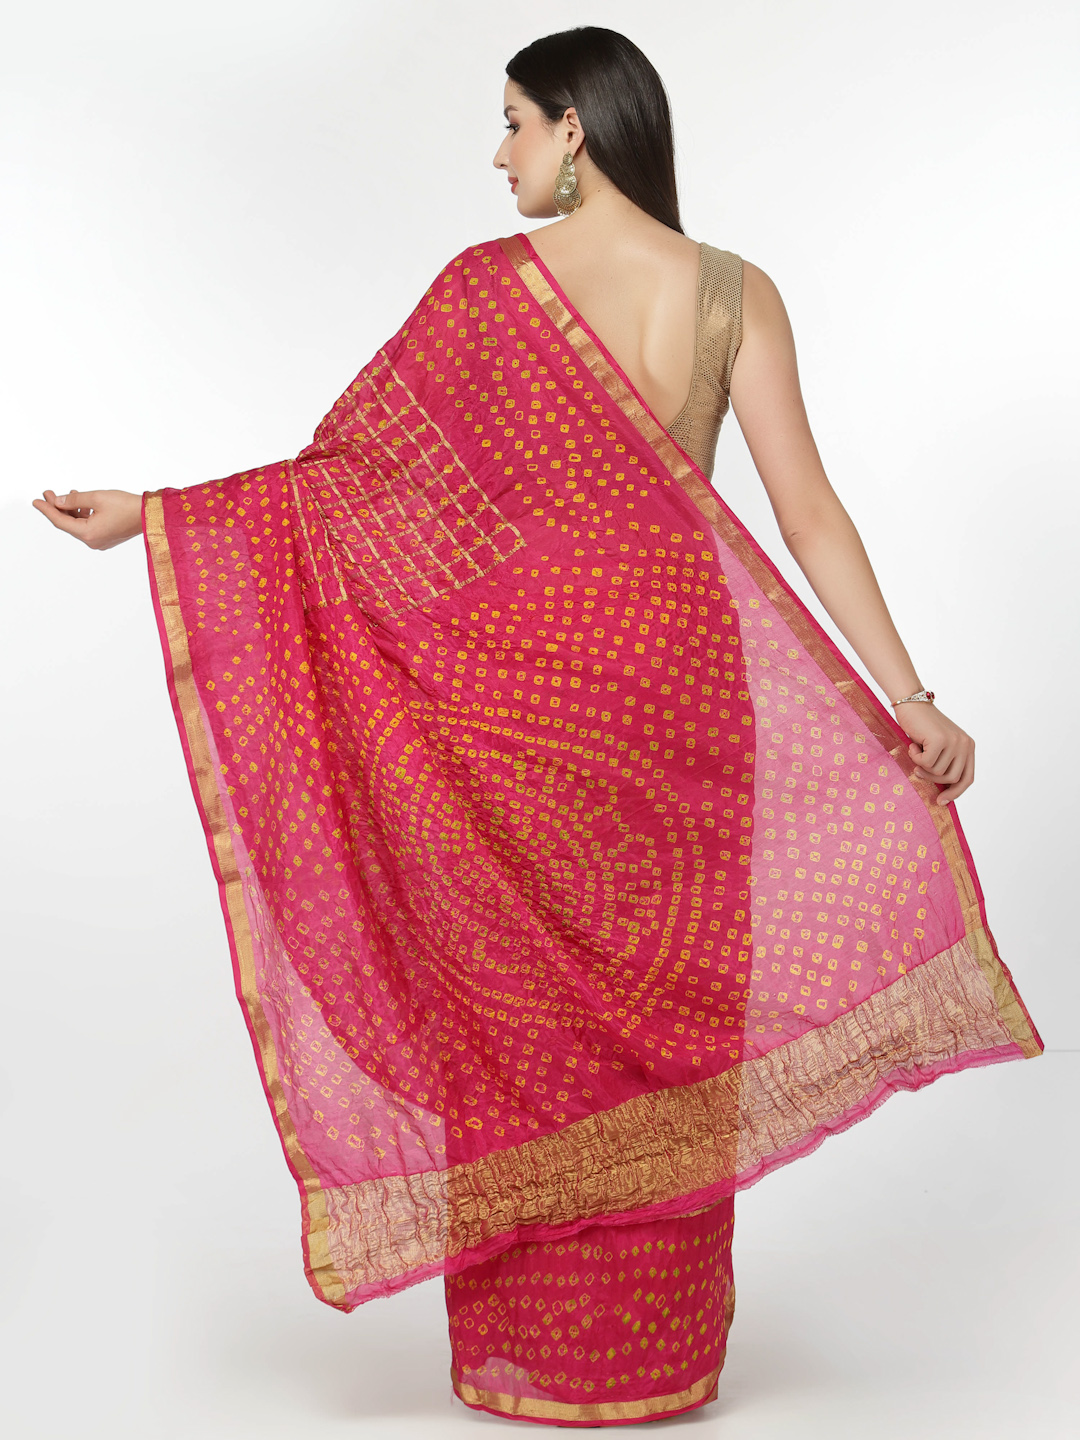 Women Silk Bandhani and Zari Weaving Saree with Unstitched Blouse - Pink